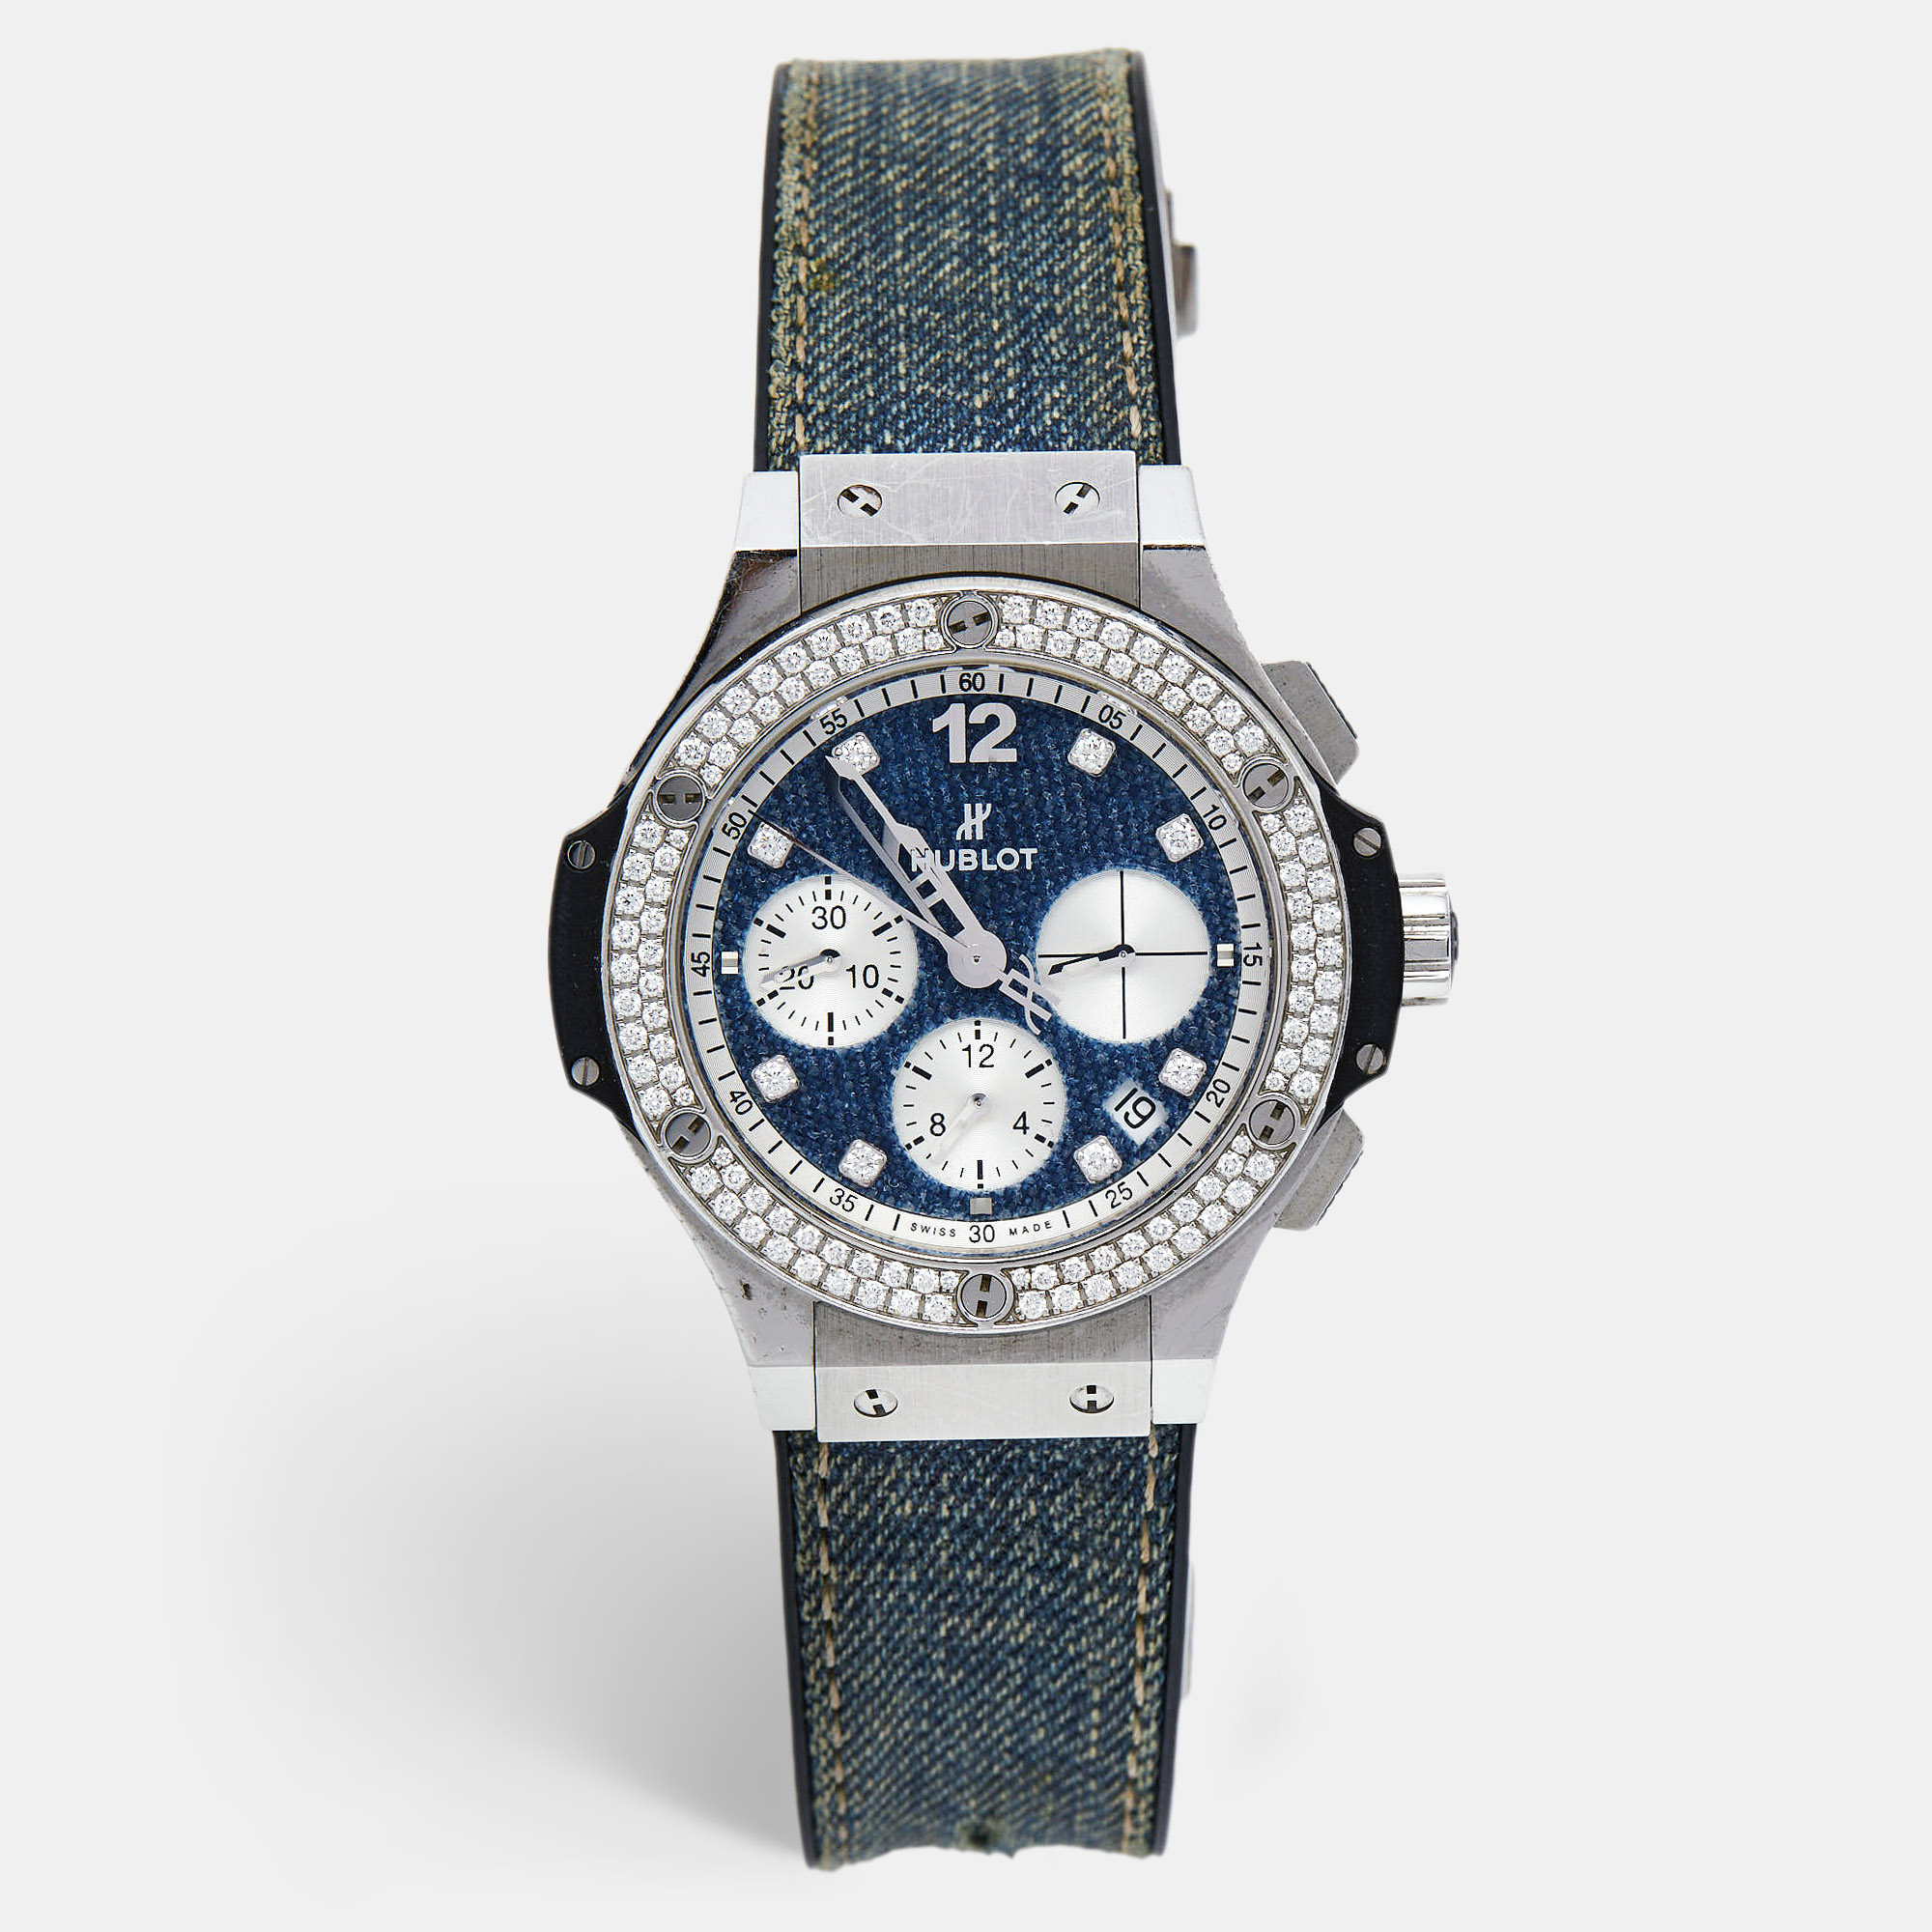 Pre-owned Hublot Blue Stainless Steel Diamond Fabric Rubber Limited Edition Big Bang Jeans 341.sx.2710.nr.1104.jeans 